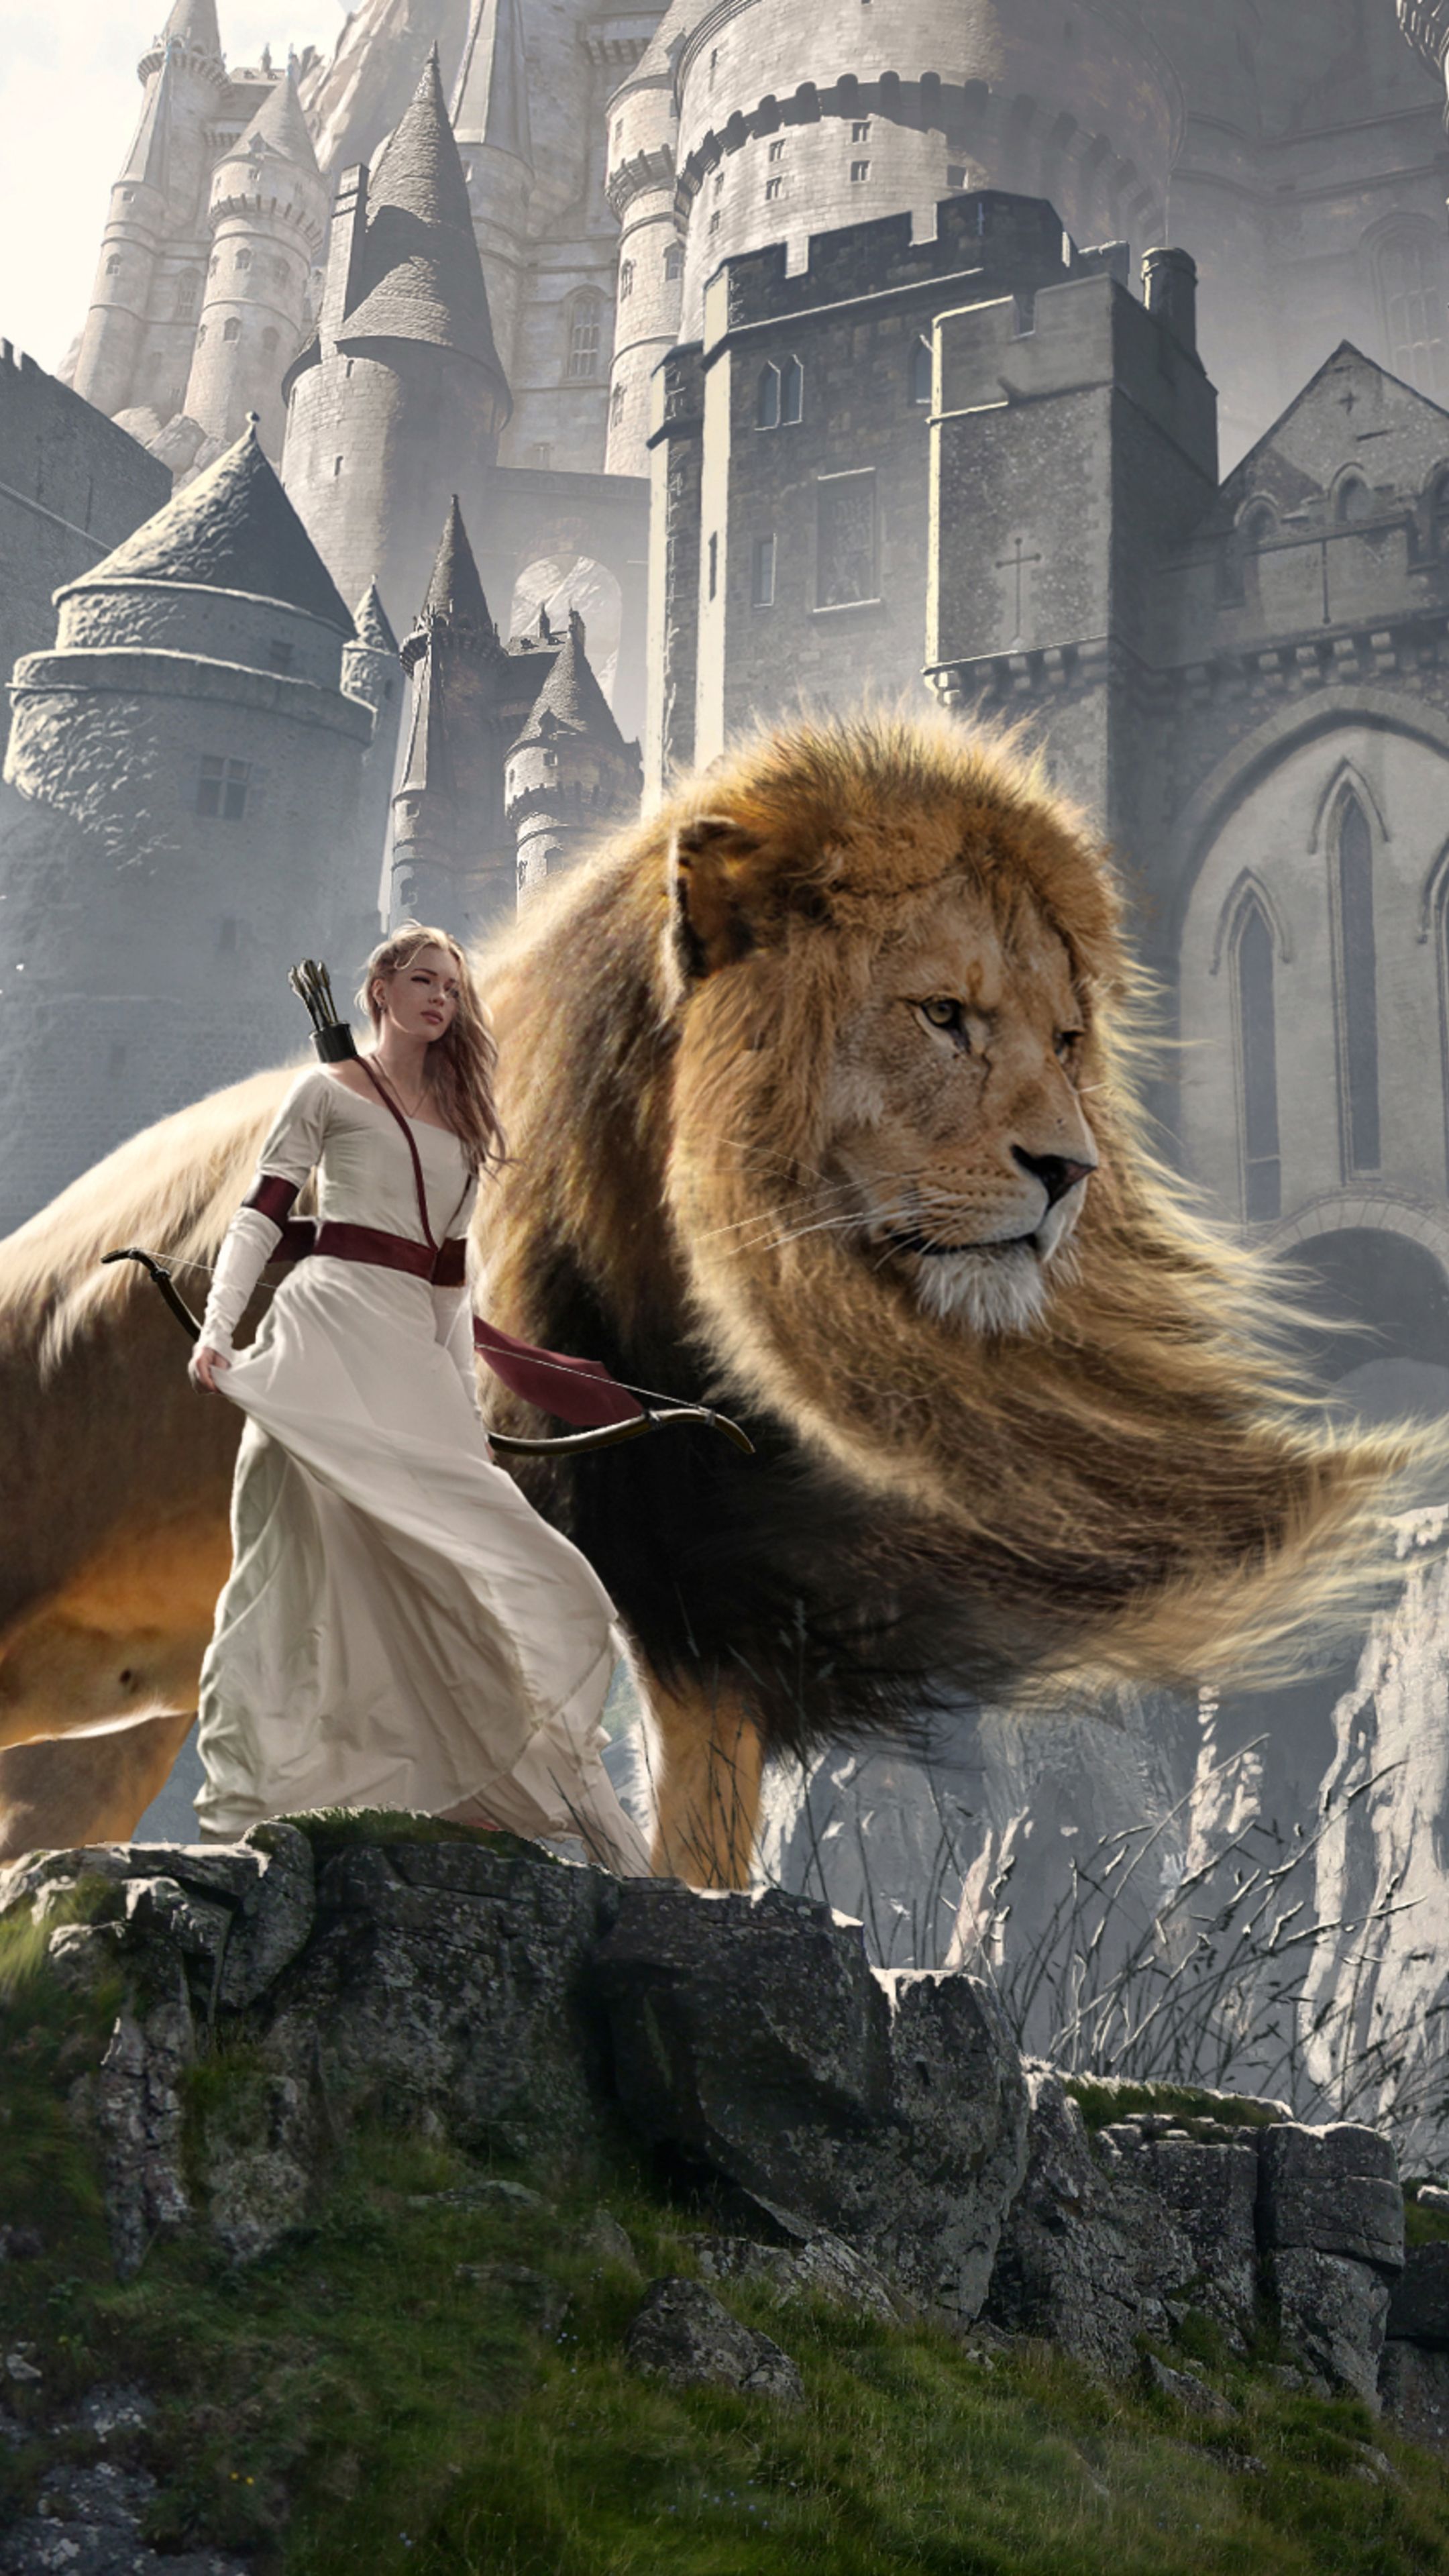 The Chronicles Of Narnia Wallpaper Free The Chronicles Of Narnia Background